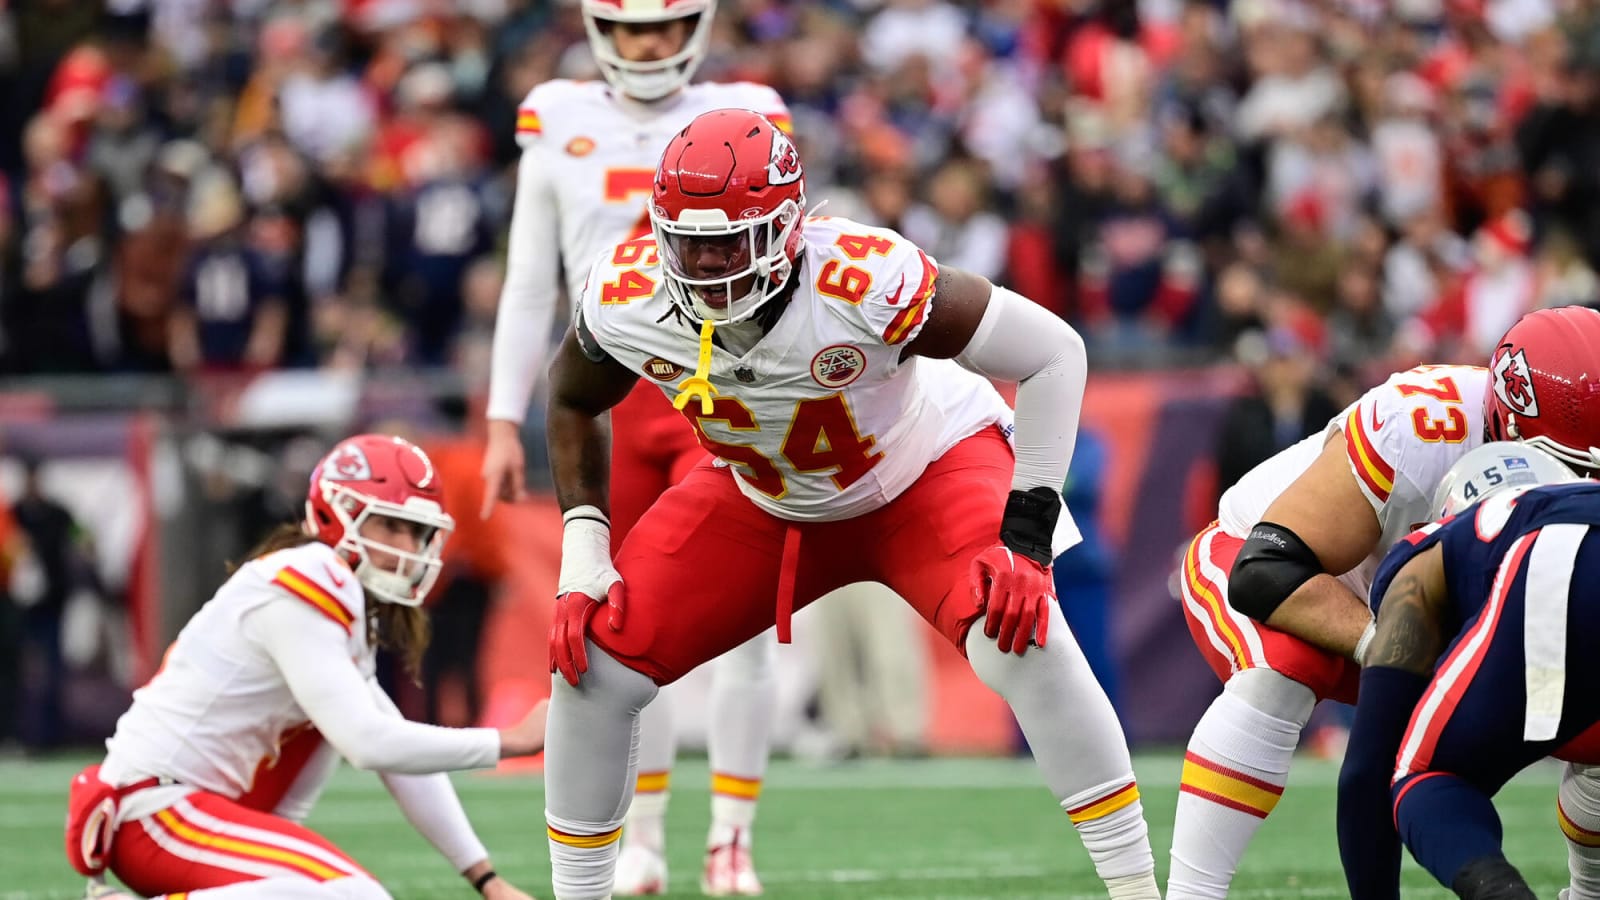 Report: 2 More Kansas City Chiefs Players Arrested This Offseason; Alleged Drug Possession This Time